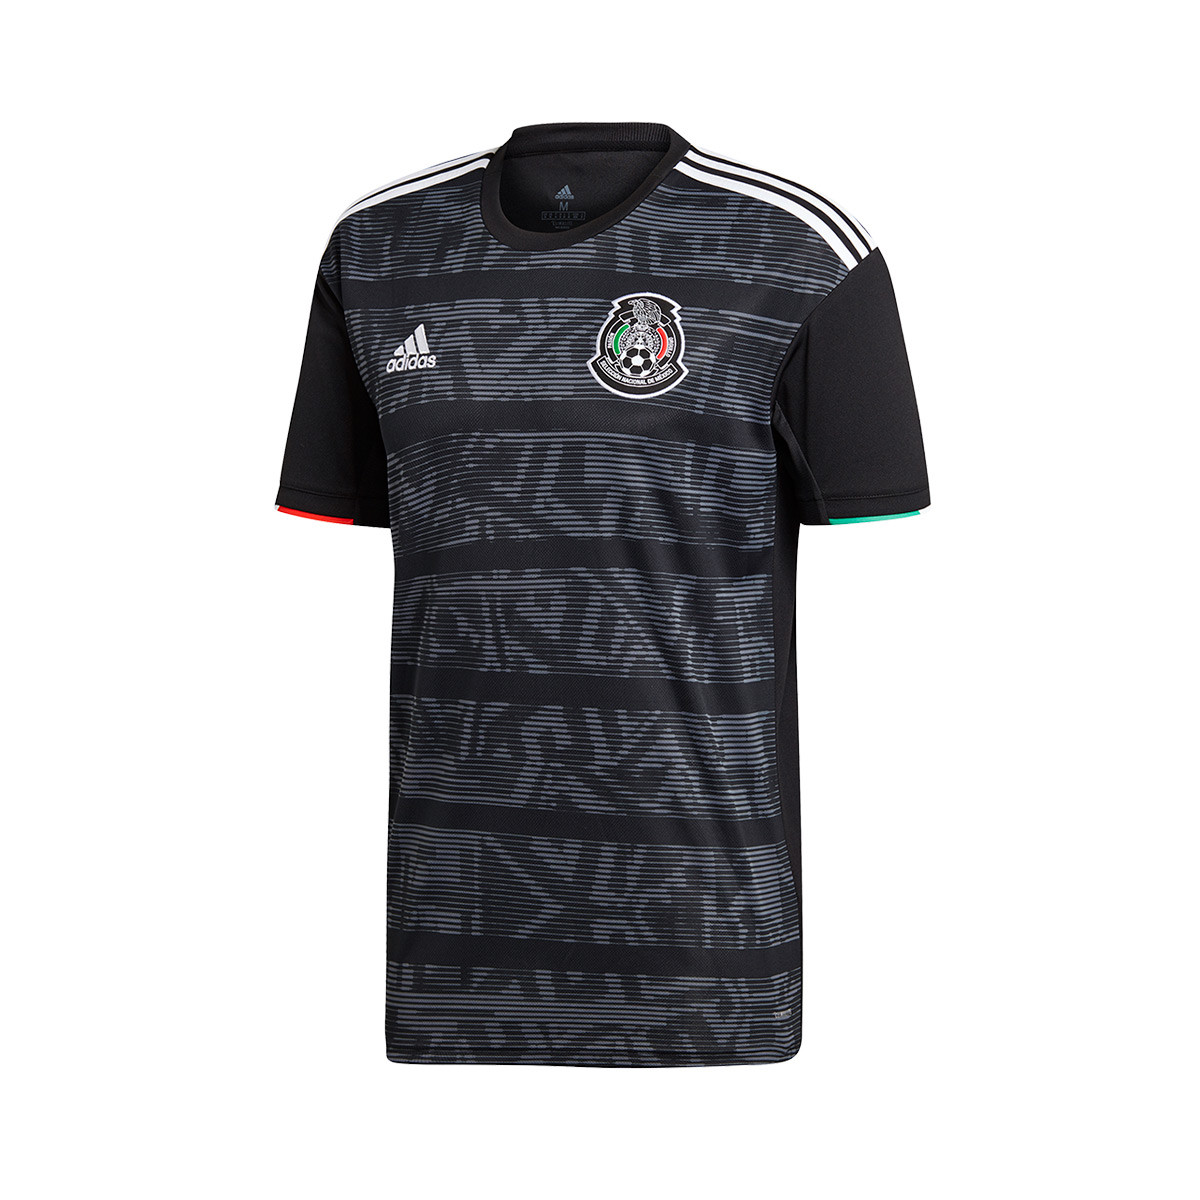 mexico fc jersey